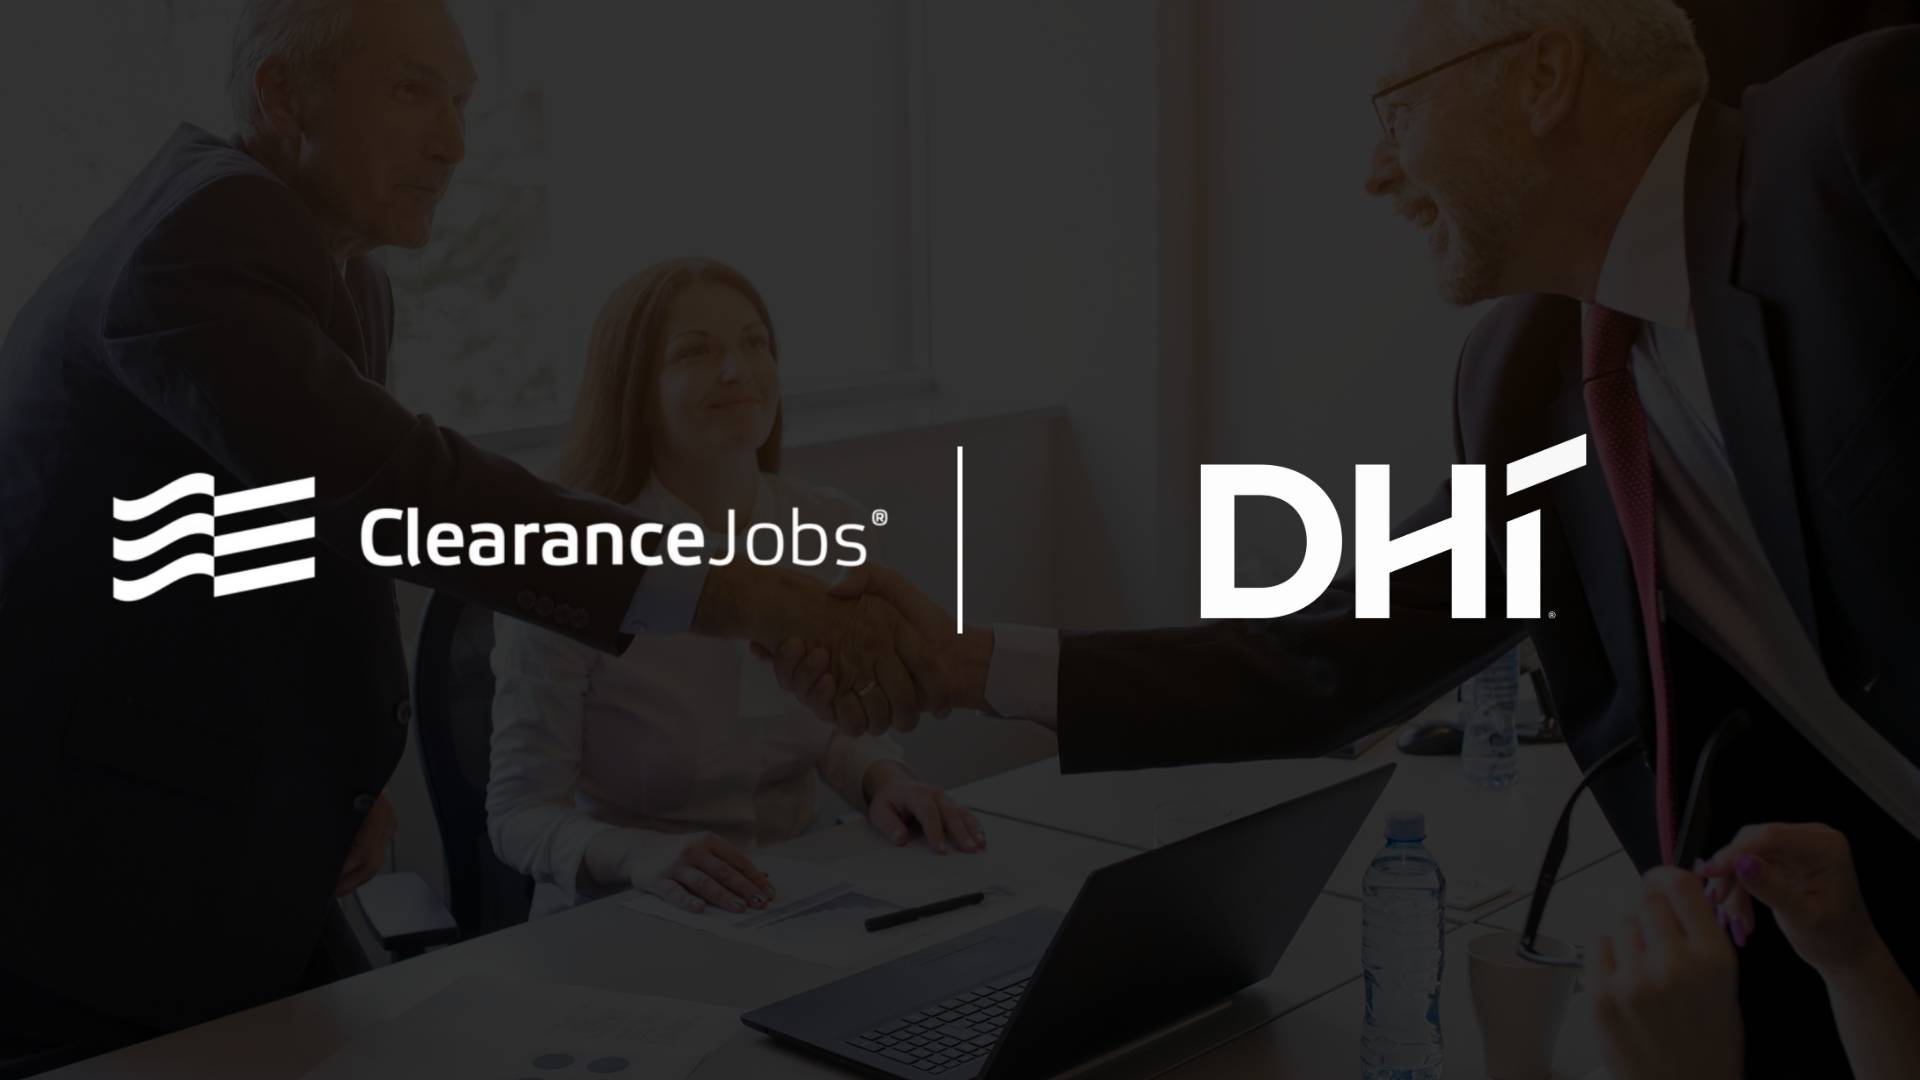 ClearanceJobs Partners with U.S. Department of Labor to Support Transitioning Veterans